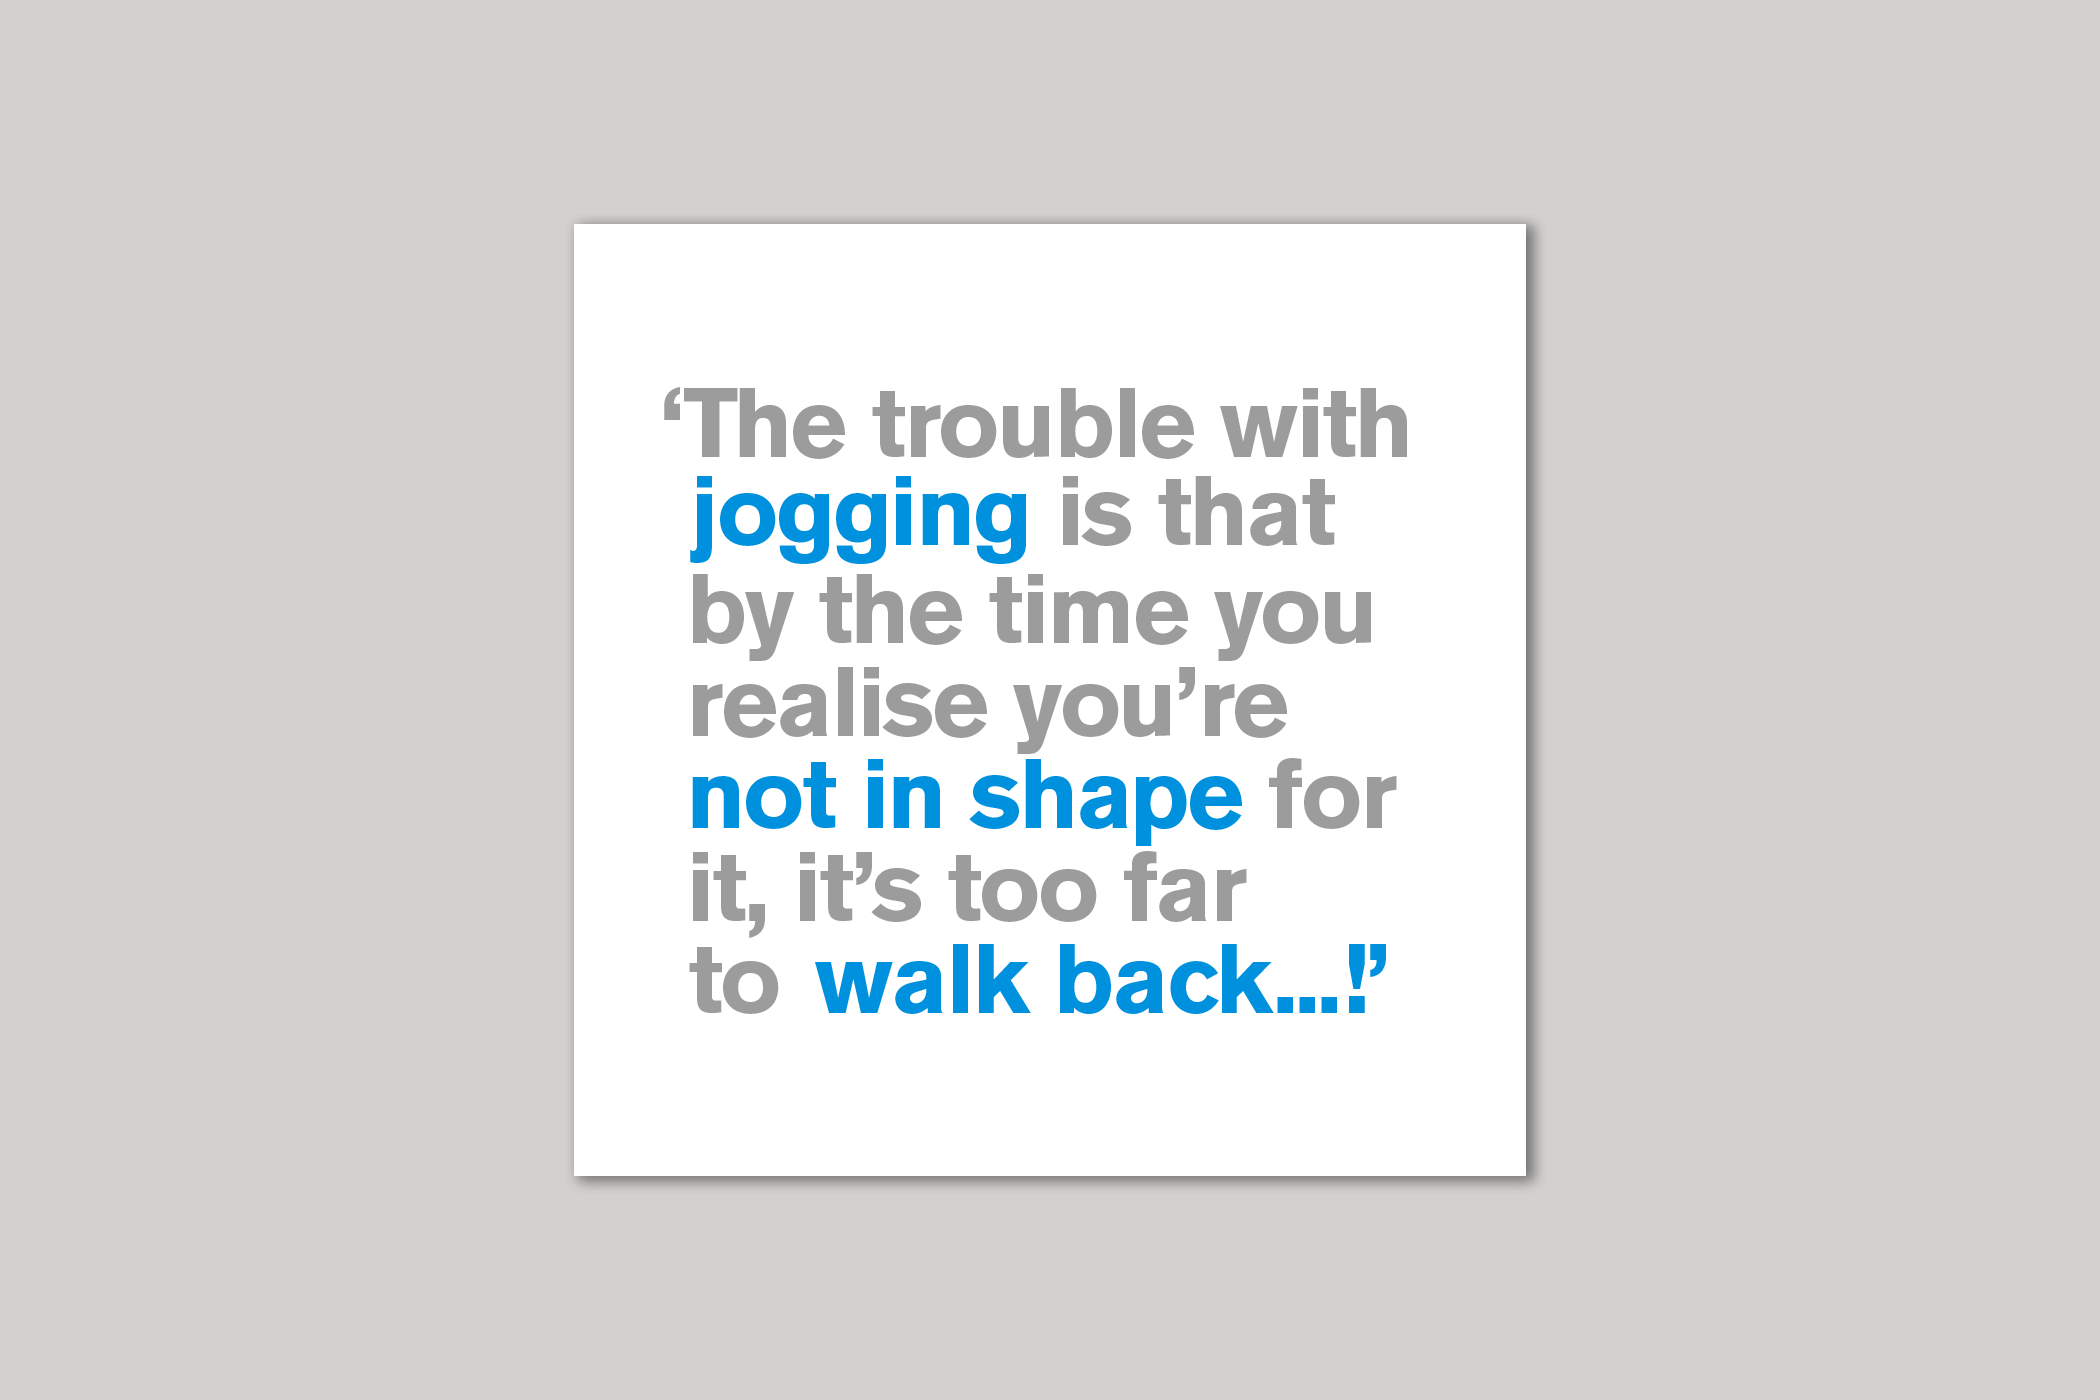 The Trouble with Jogging from Lyric range of quotation cards by Icon.